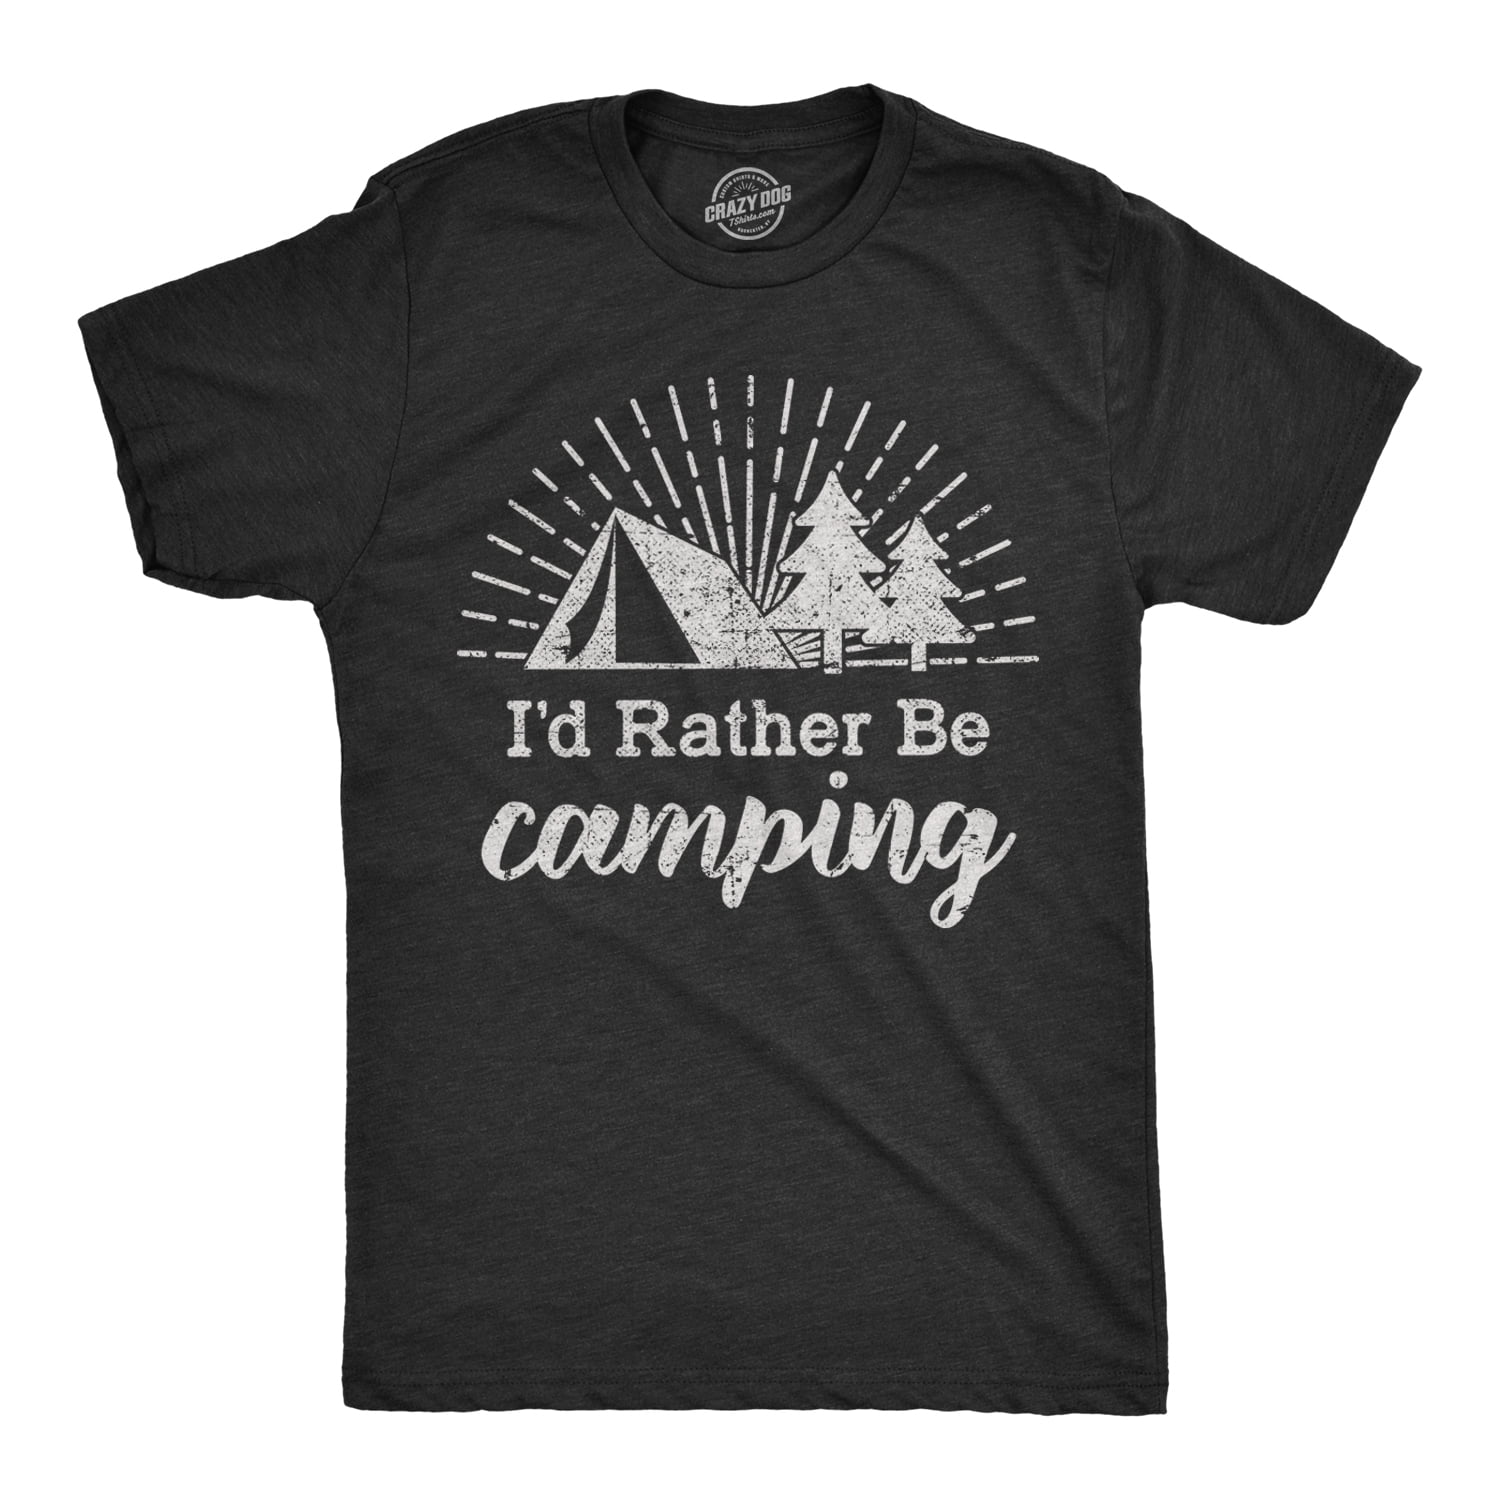 Mens Id Rather Be Camping T shirt Funny Outdoor Adventure Hiking Tee ...